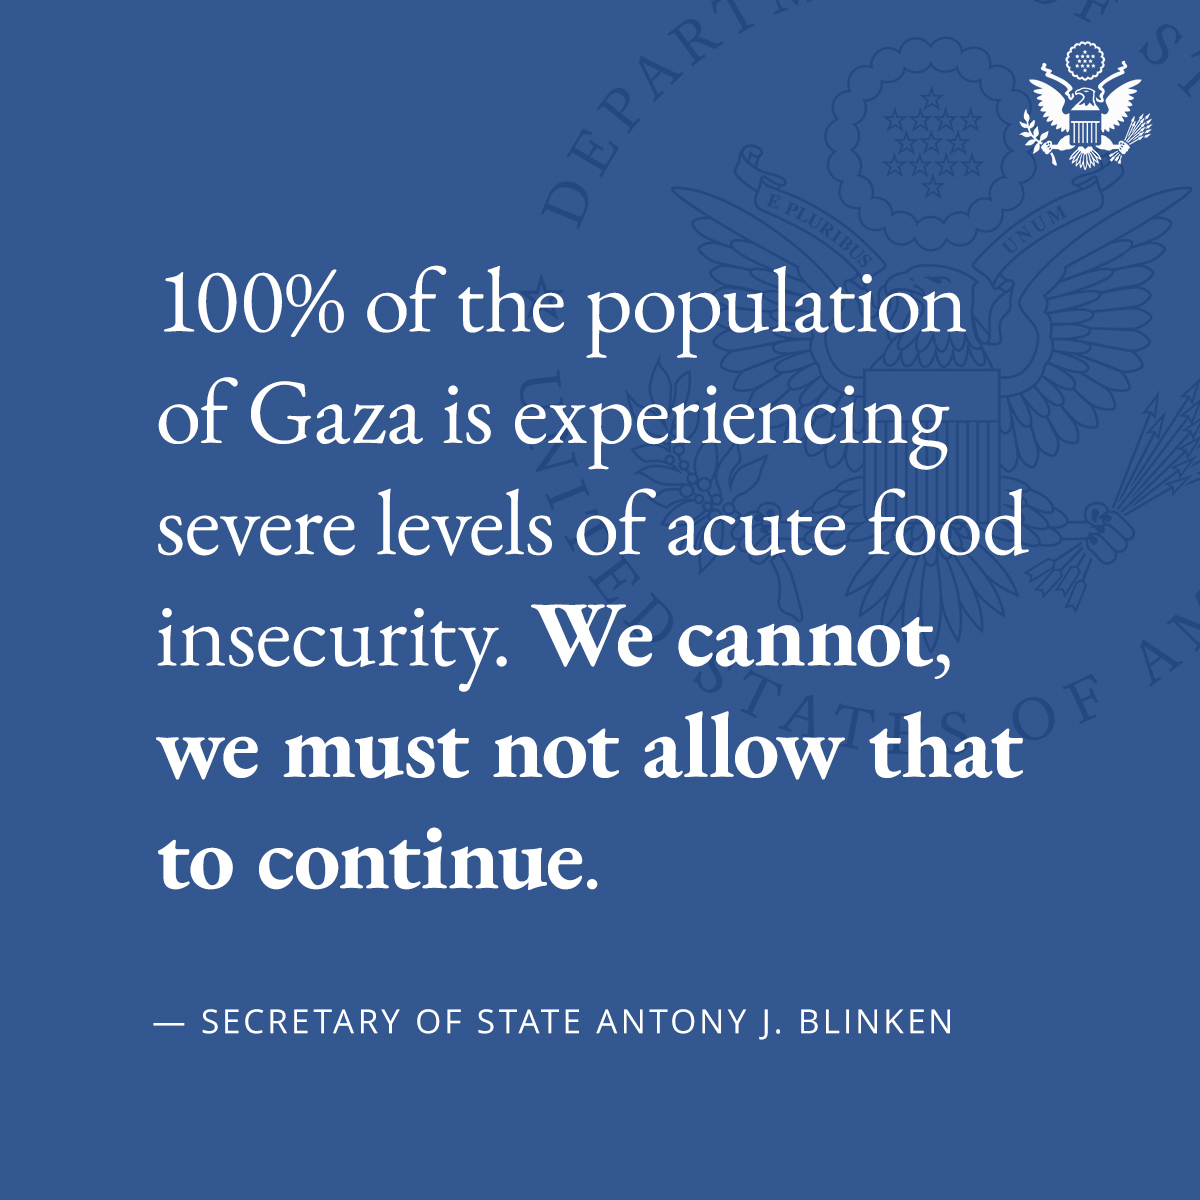 The people who live in Gaza continue to face a horrific humanitarian situation. Humanitarian assistance must be a priority and it must be sustained.